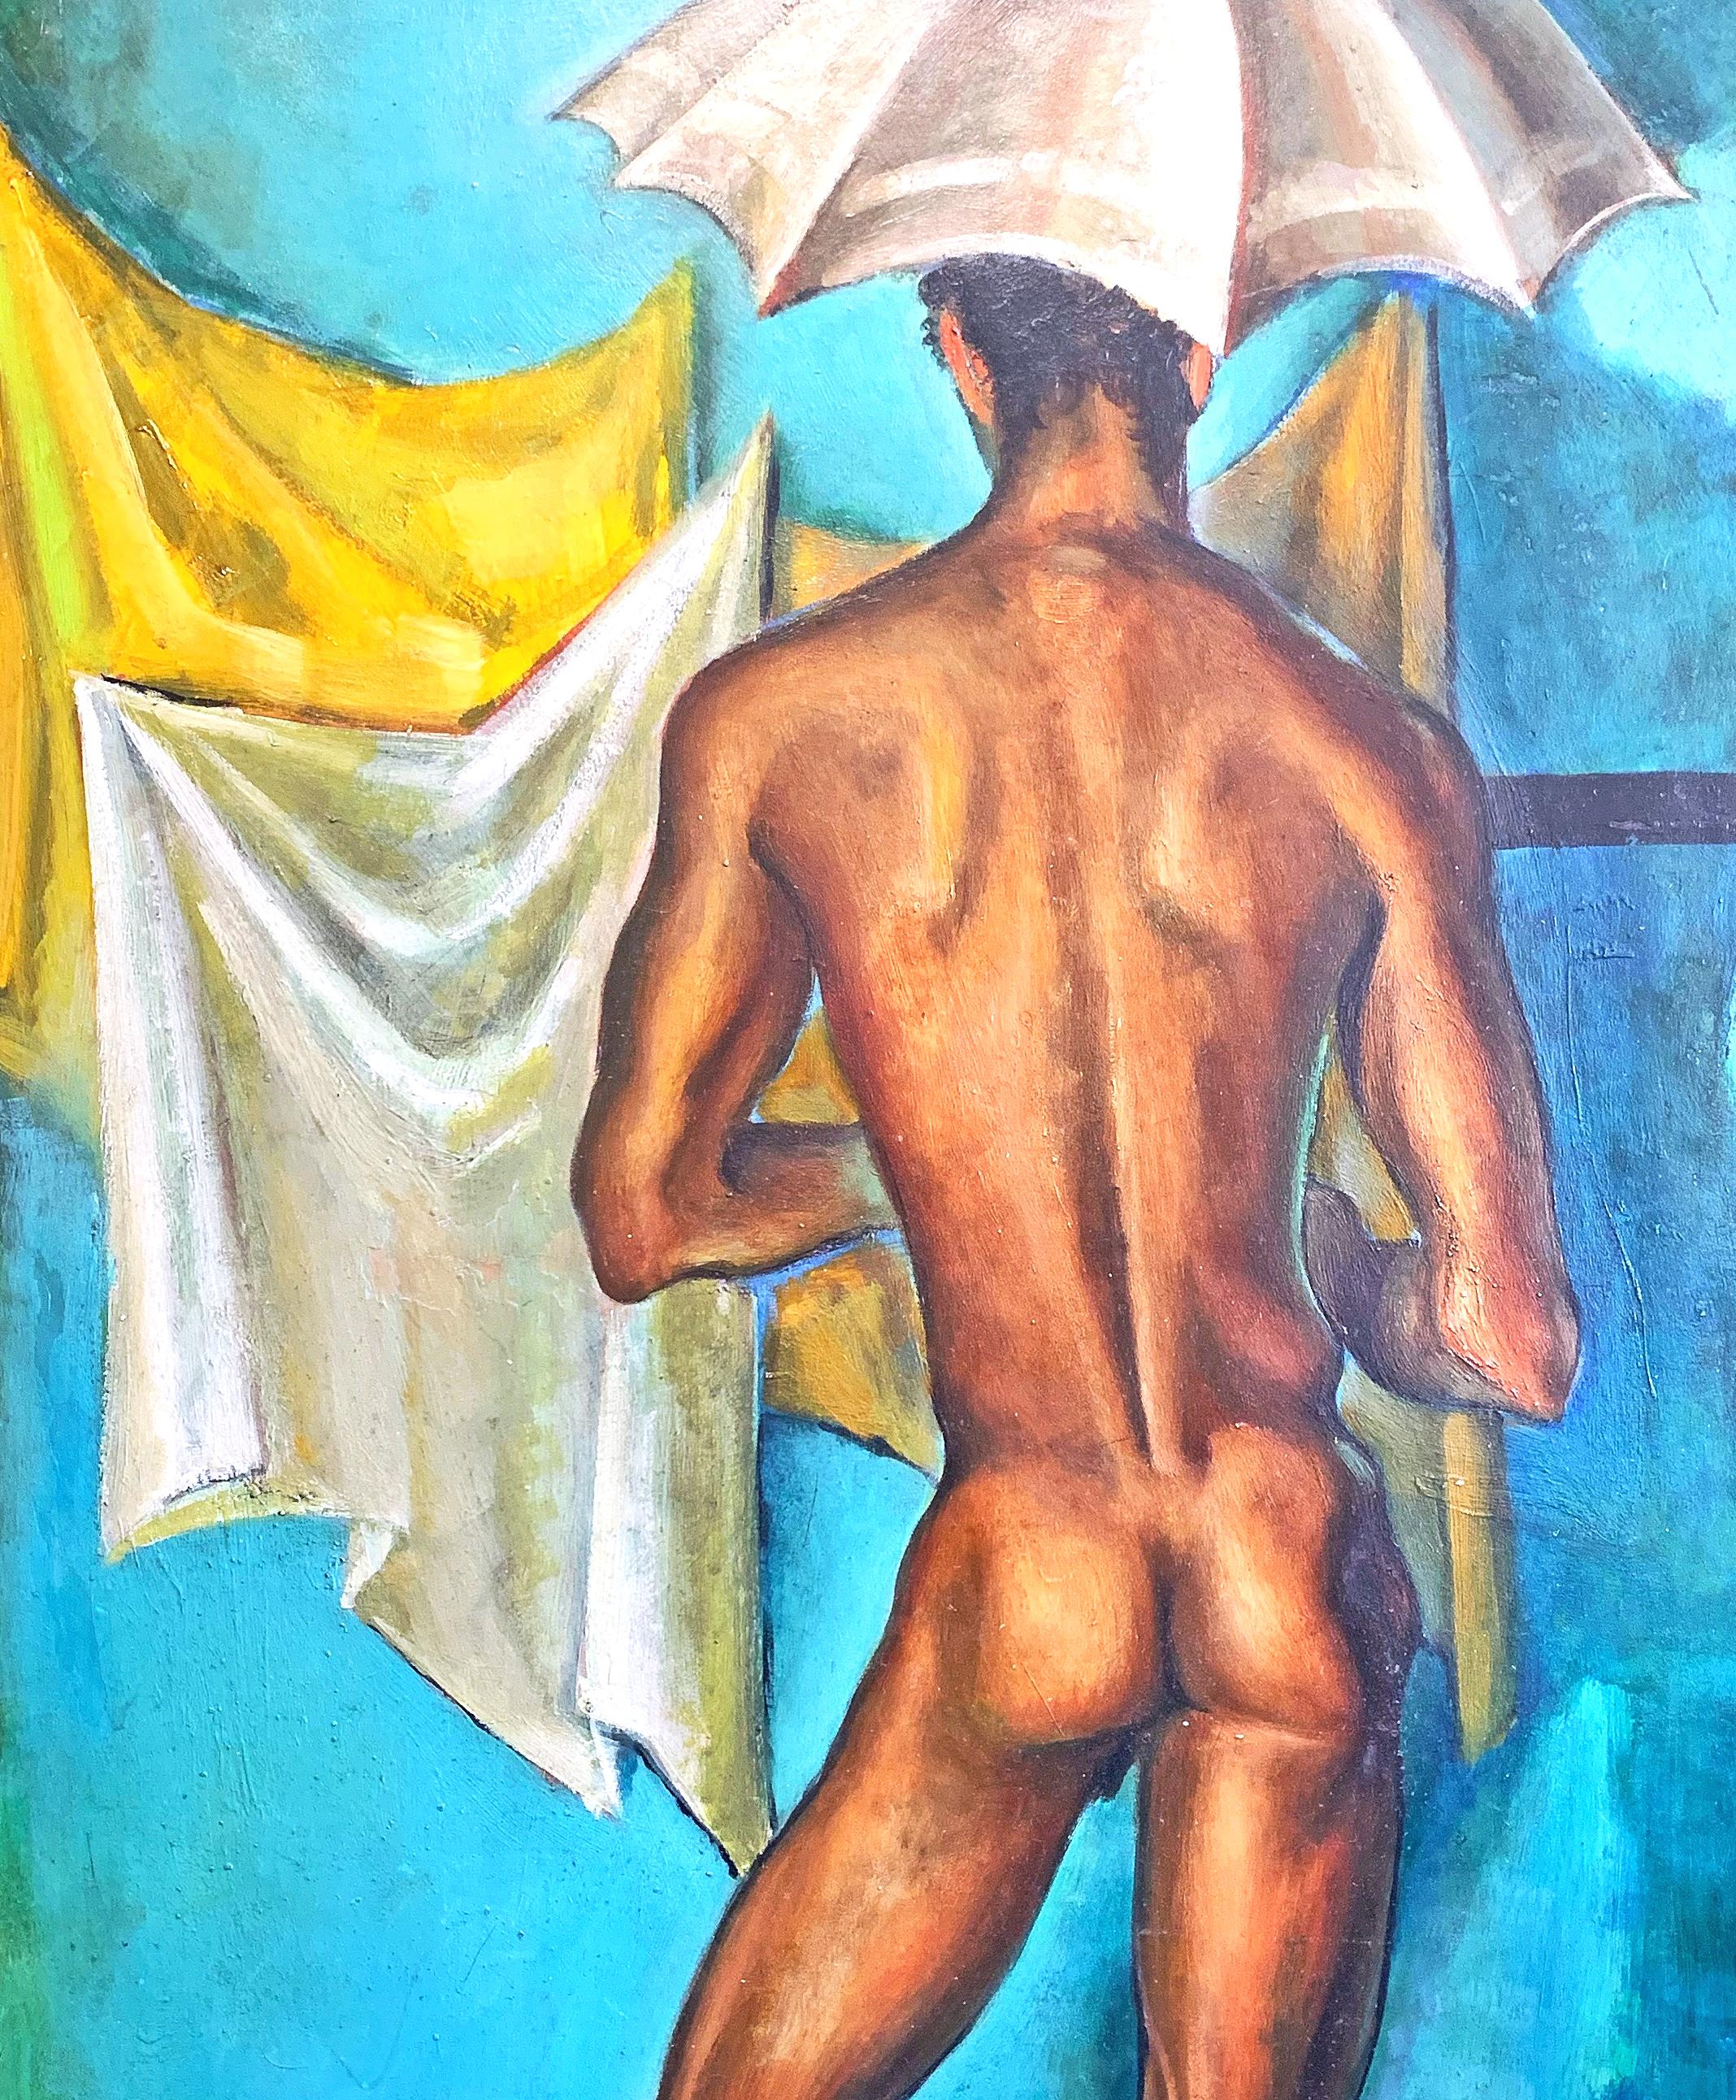 Vividly painted in tones of turquoise, canary yellow and warm brown, this extraordinary depiction of a slender Black male nude holding an umbrella -- in our opinion a Mid-Century Modern masterpiece with hints of Surrealism -- was painted by Raoul